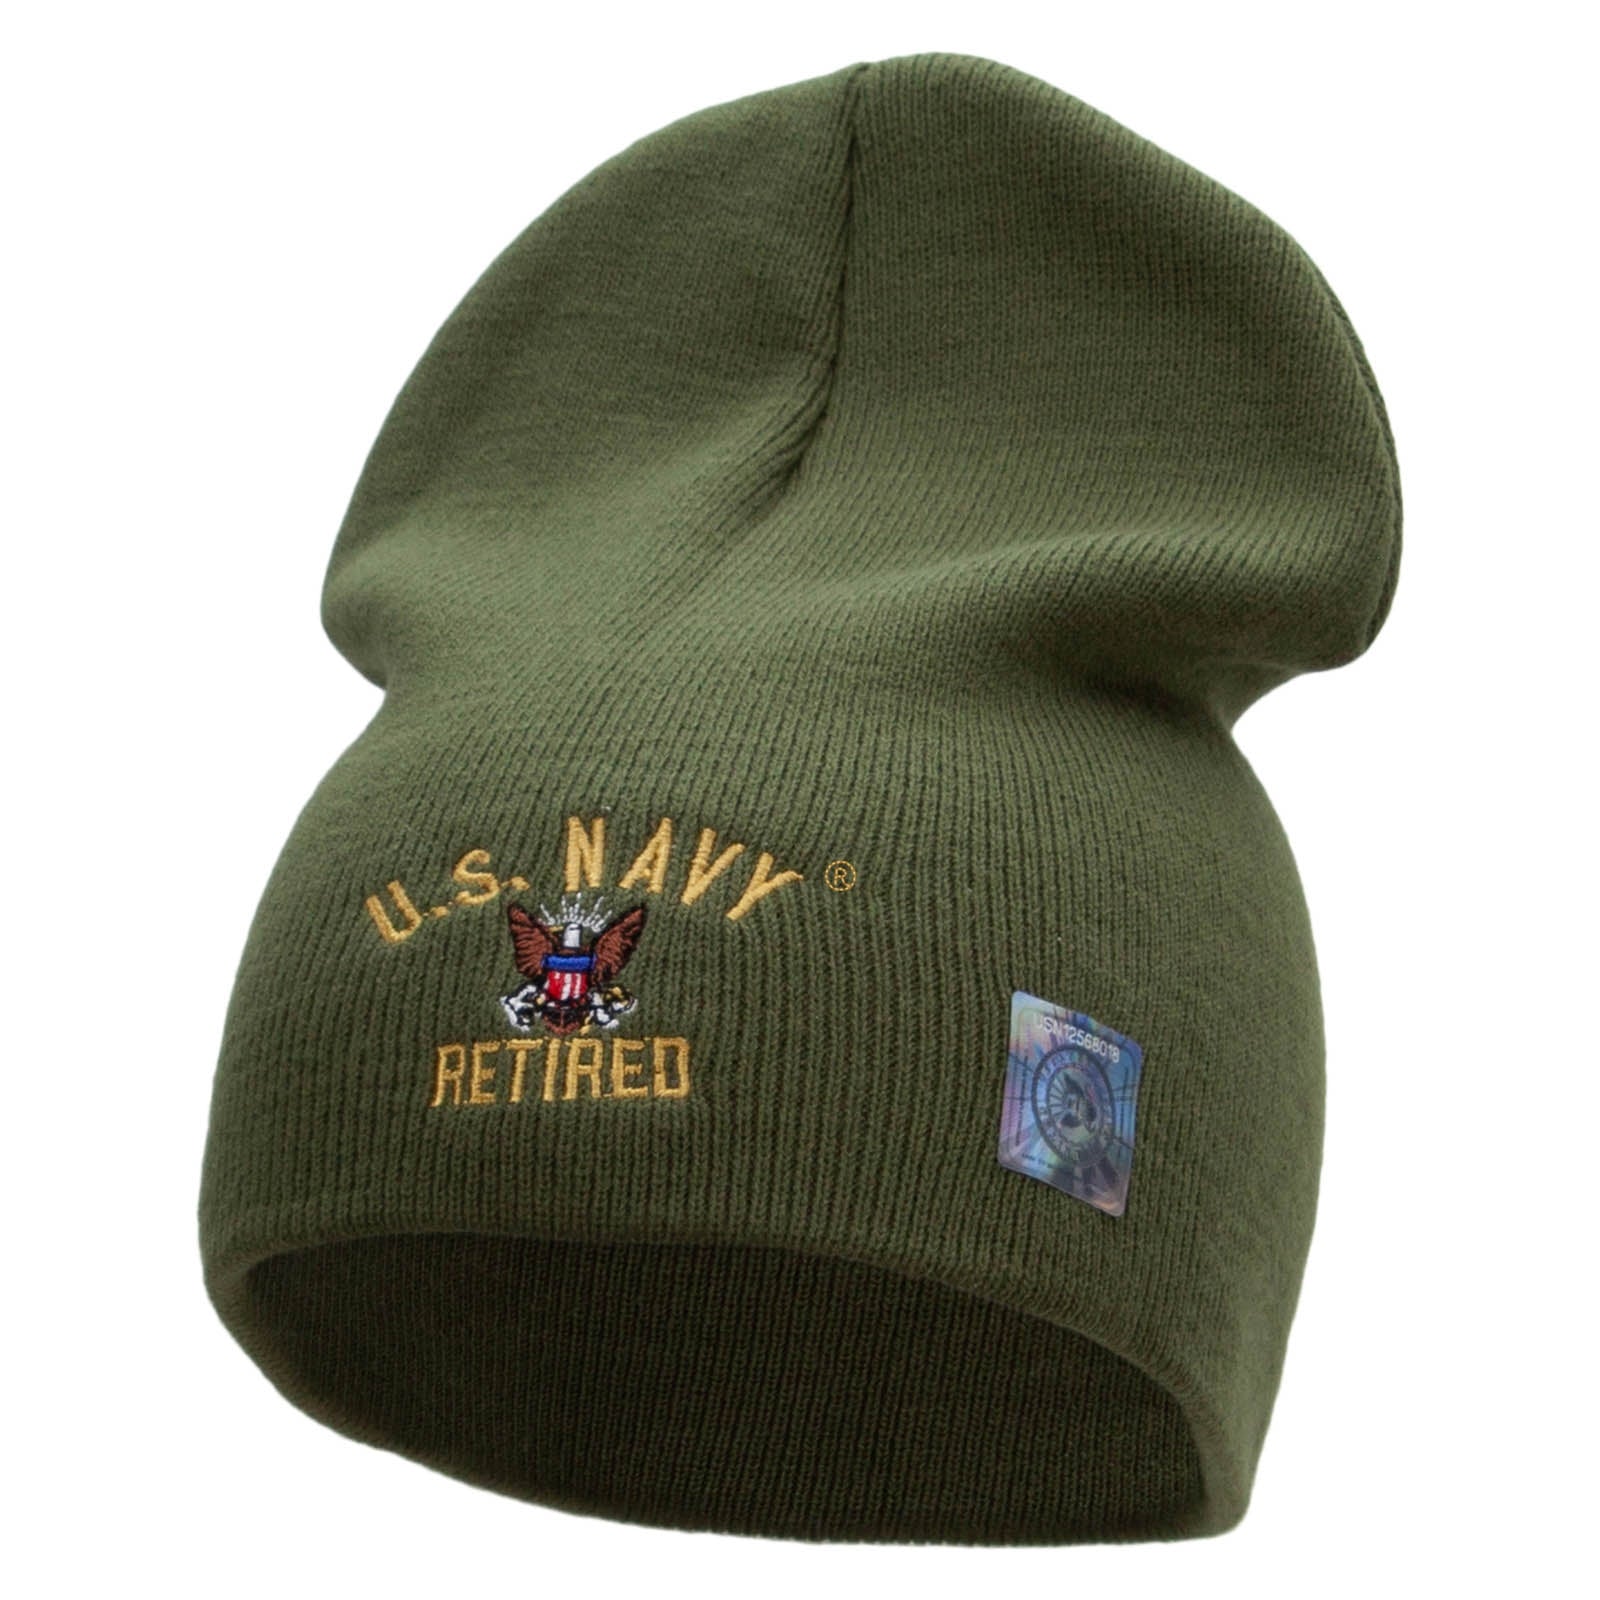 Licensed US Navy Retired Embroidered Short Beanie Made in USA - Olive OSFM